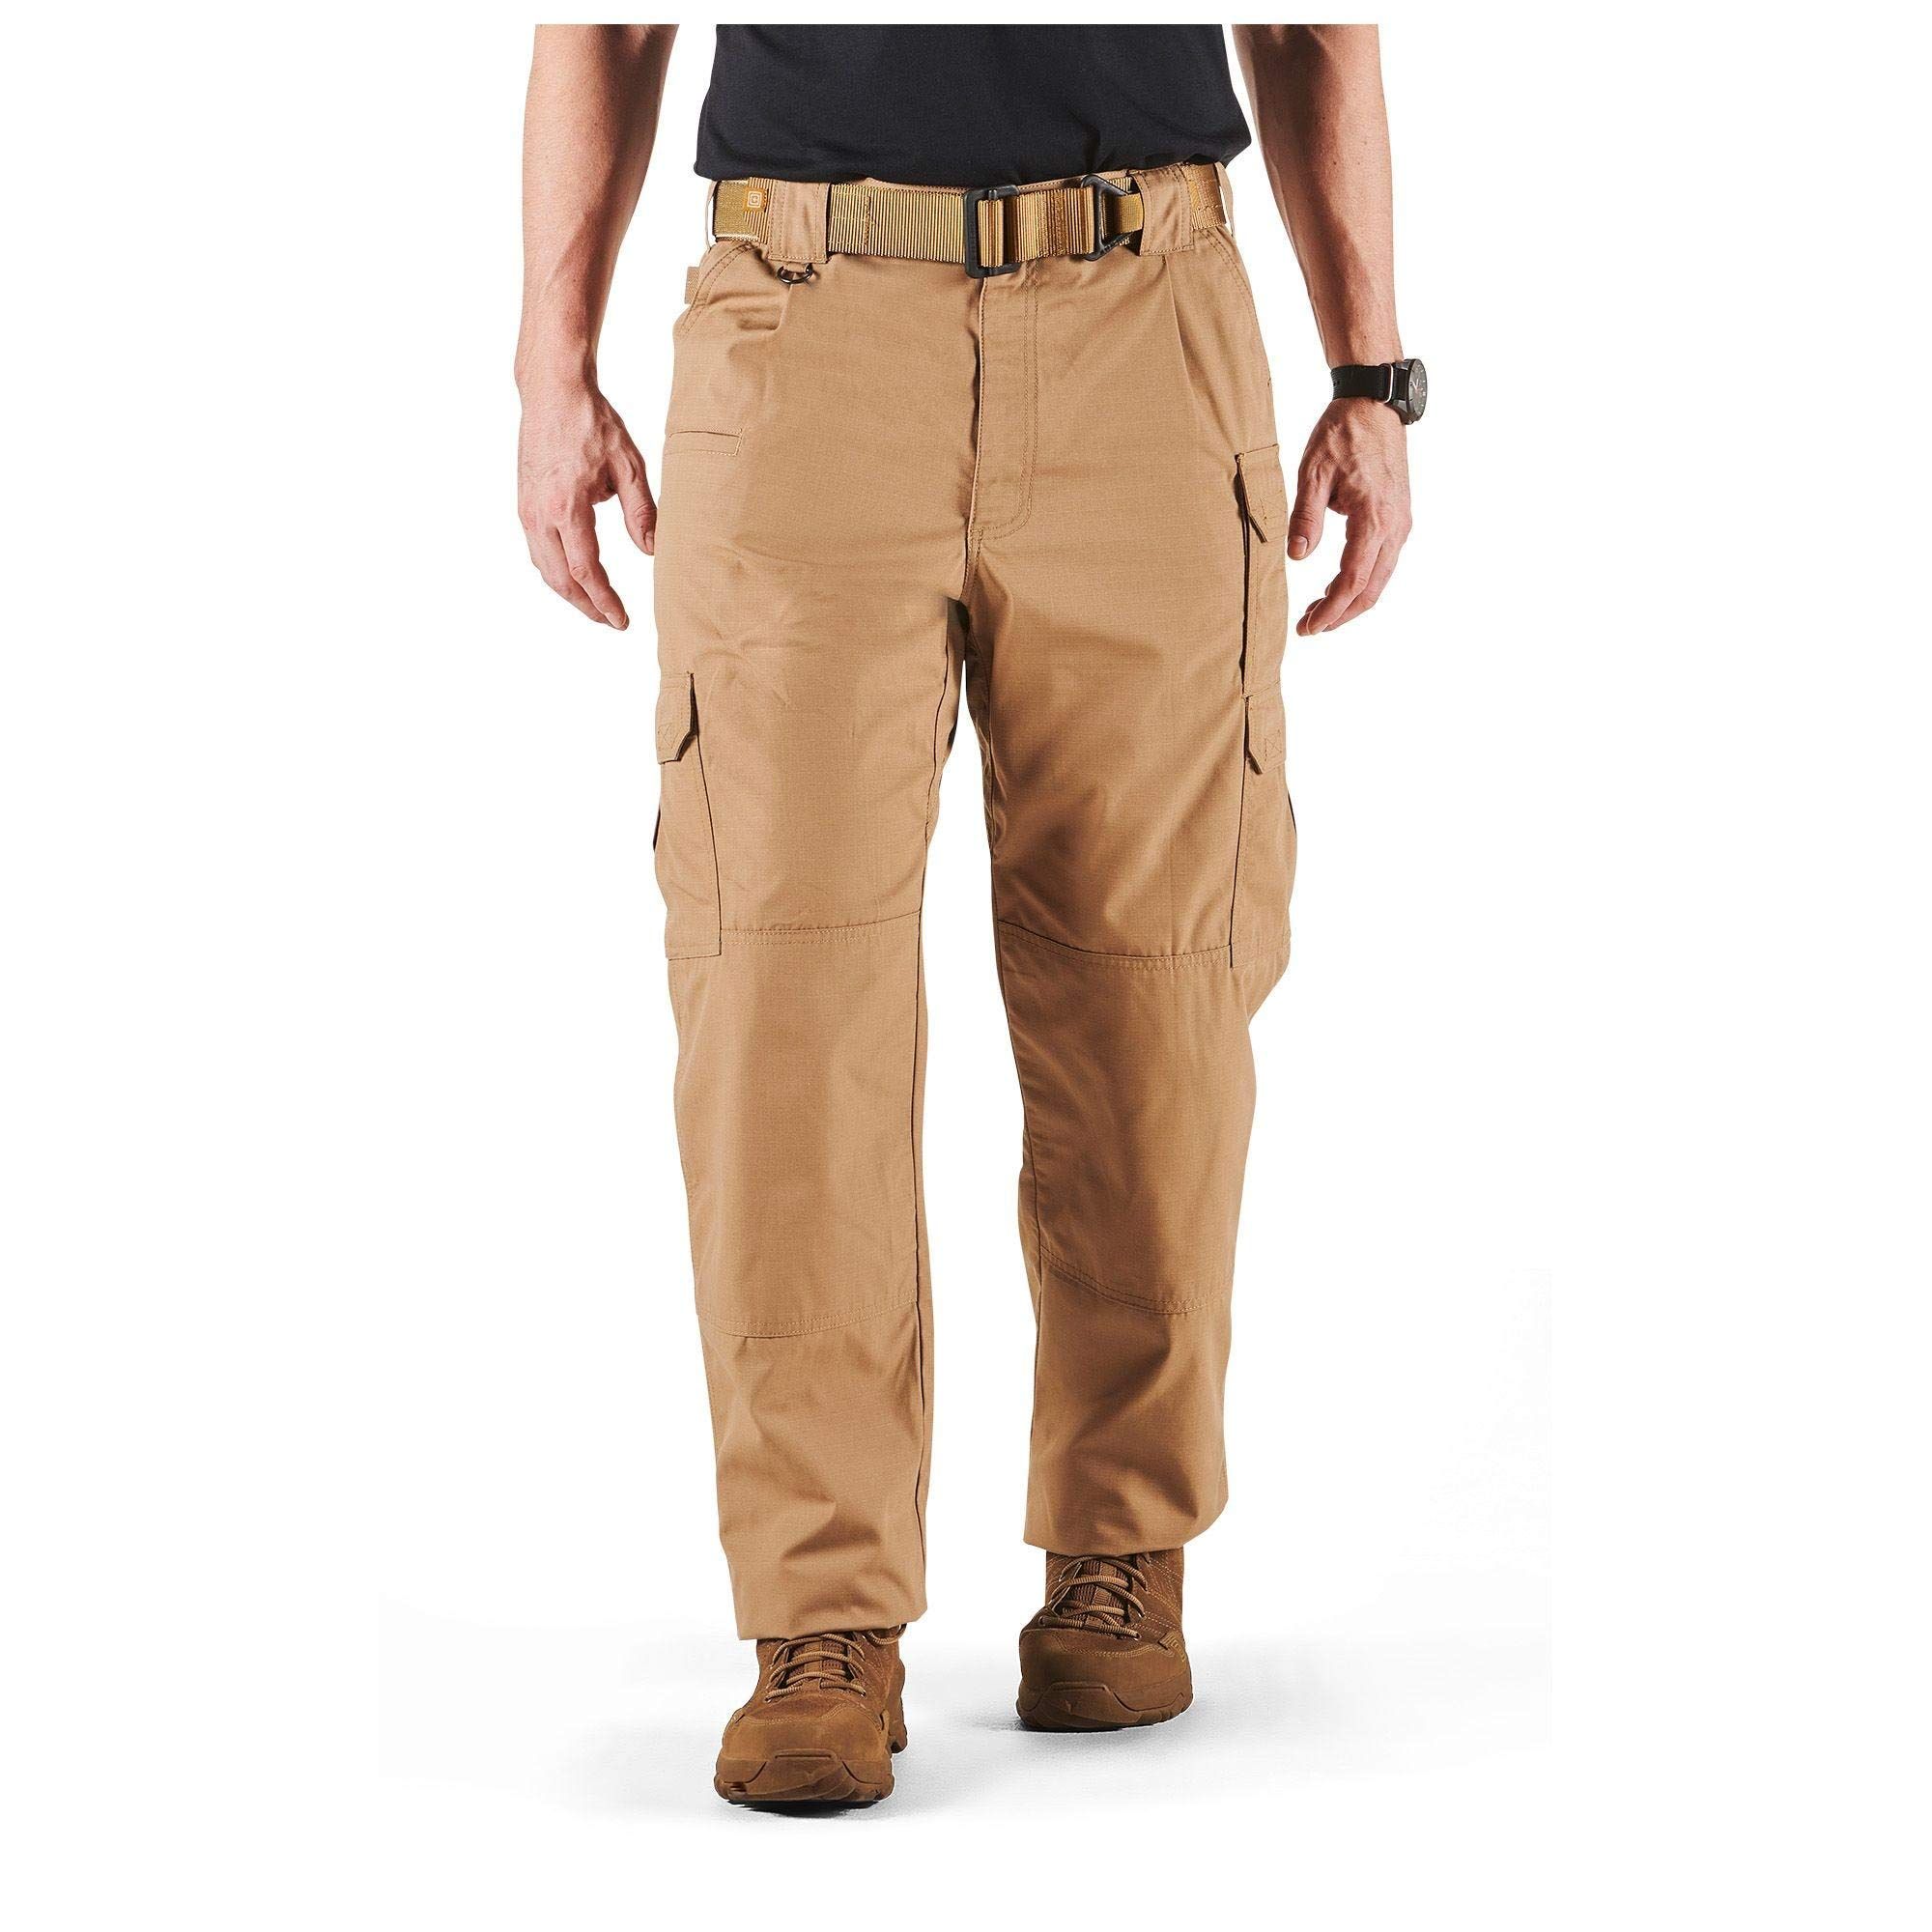 The Best Work Pants for Men in 2021 - Swiss Cycles